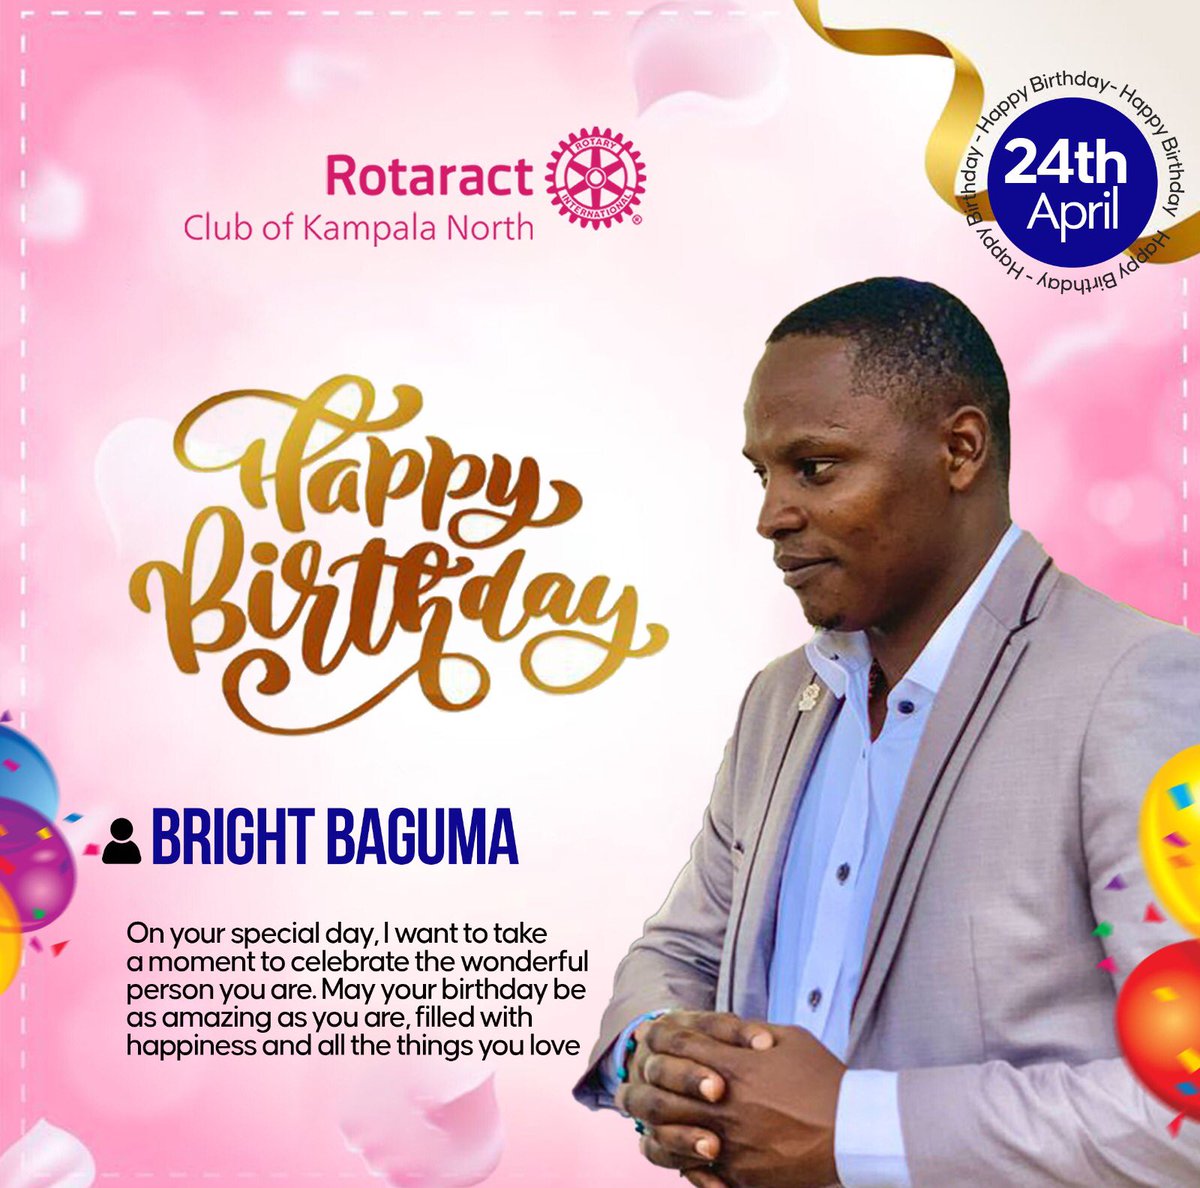 Happy Birthday IP @Rctbright! The KANOs family has always been proud of your unwavering support in serving humanity. On this beautiful day in your life, we are here to wish you a joyful +1 celebration. 🥳